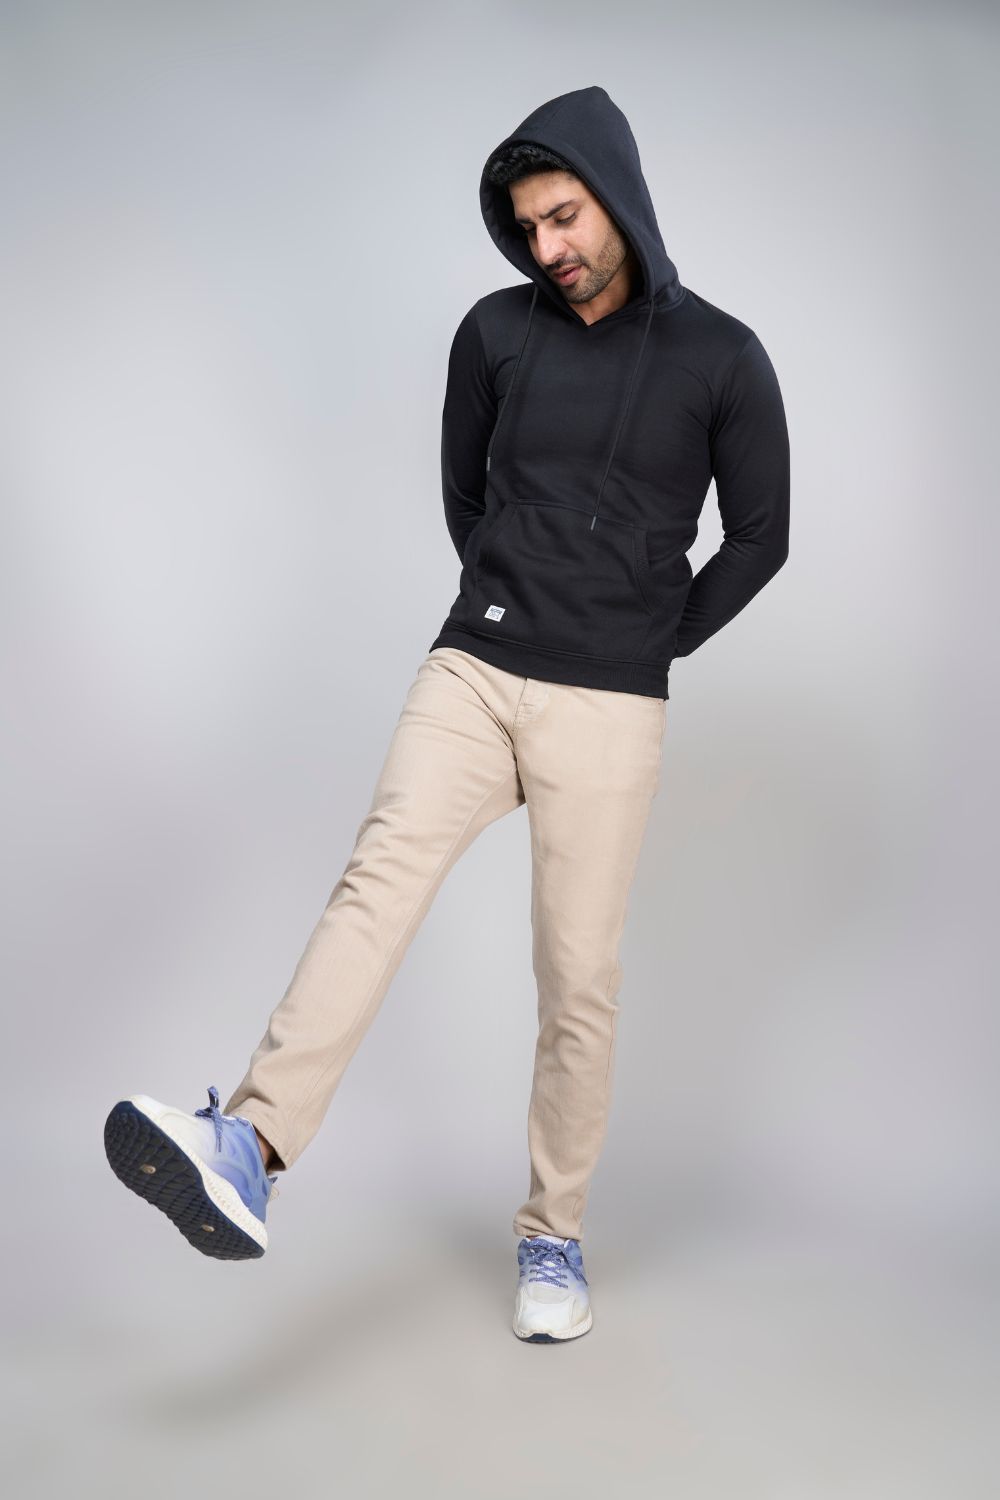 A model wearing Black colored, hoodie for men with full sleeves and relaxed fit